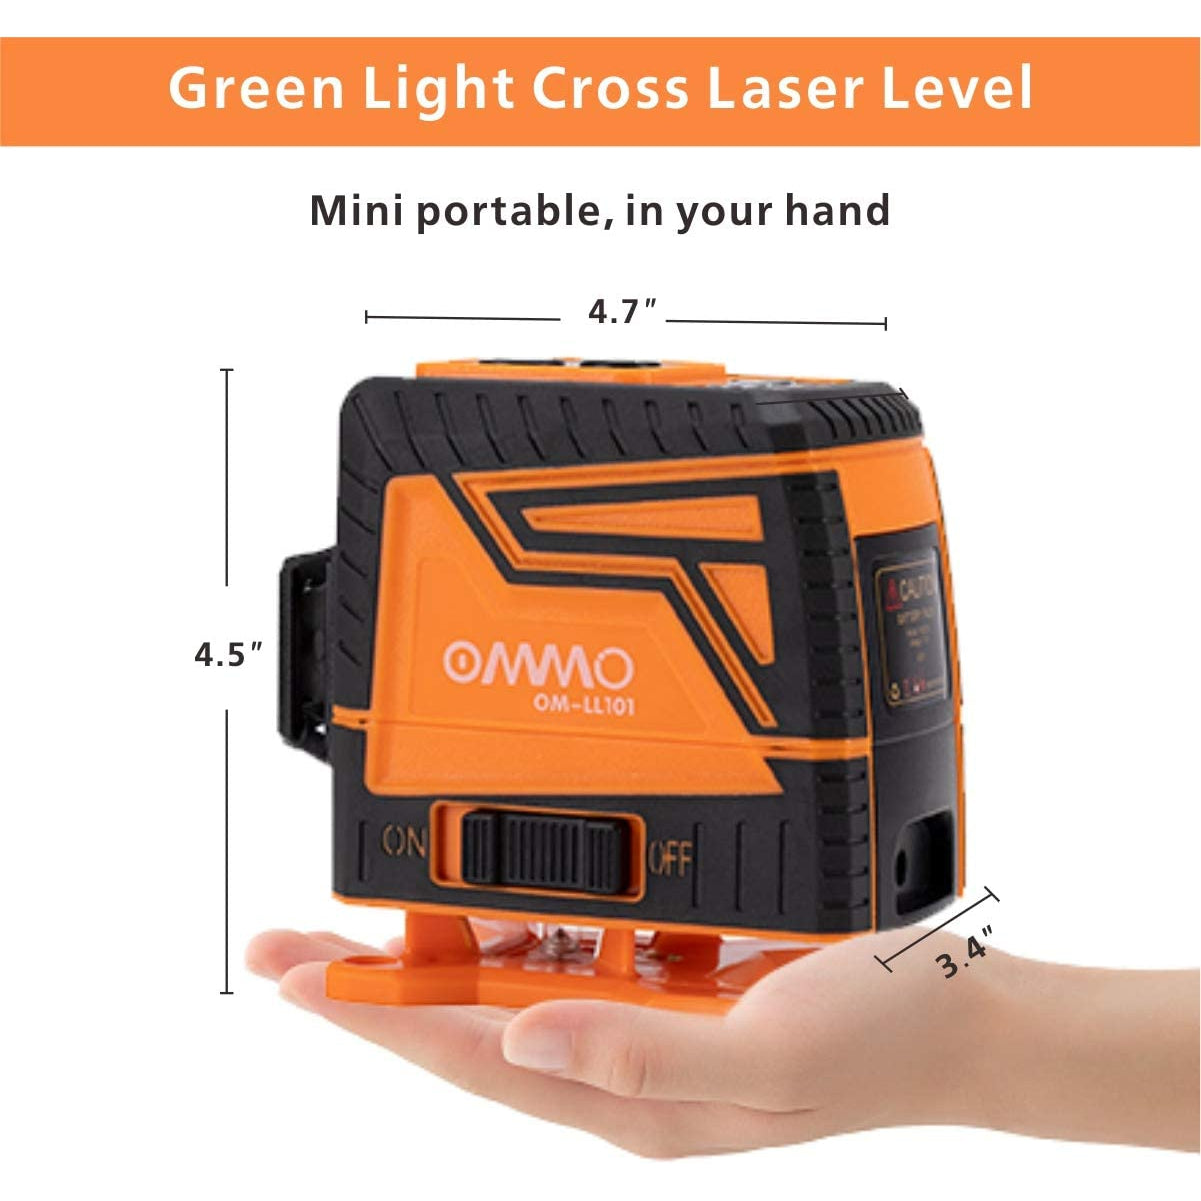 OMMO Laser Level, 12 Lines 3D Green Laser Level Tool, Self-Levelling Alignment 360° Vertical and Horizontal Line